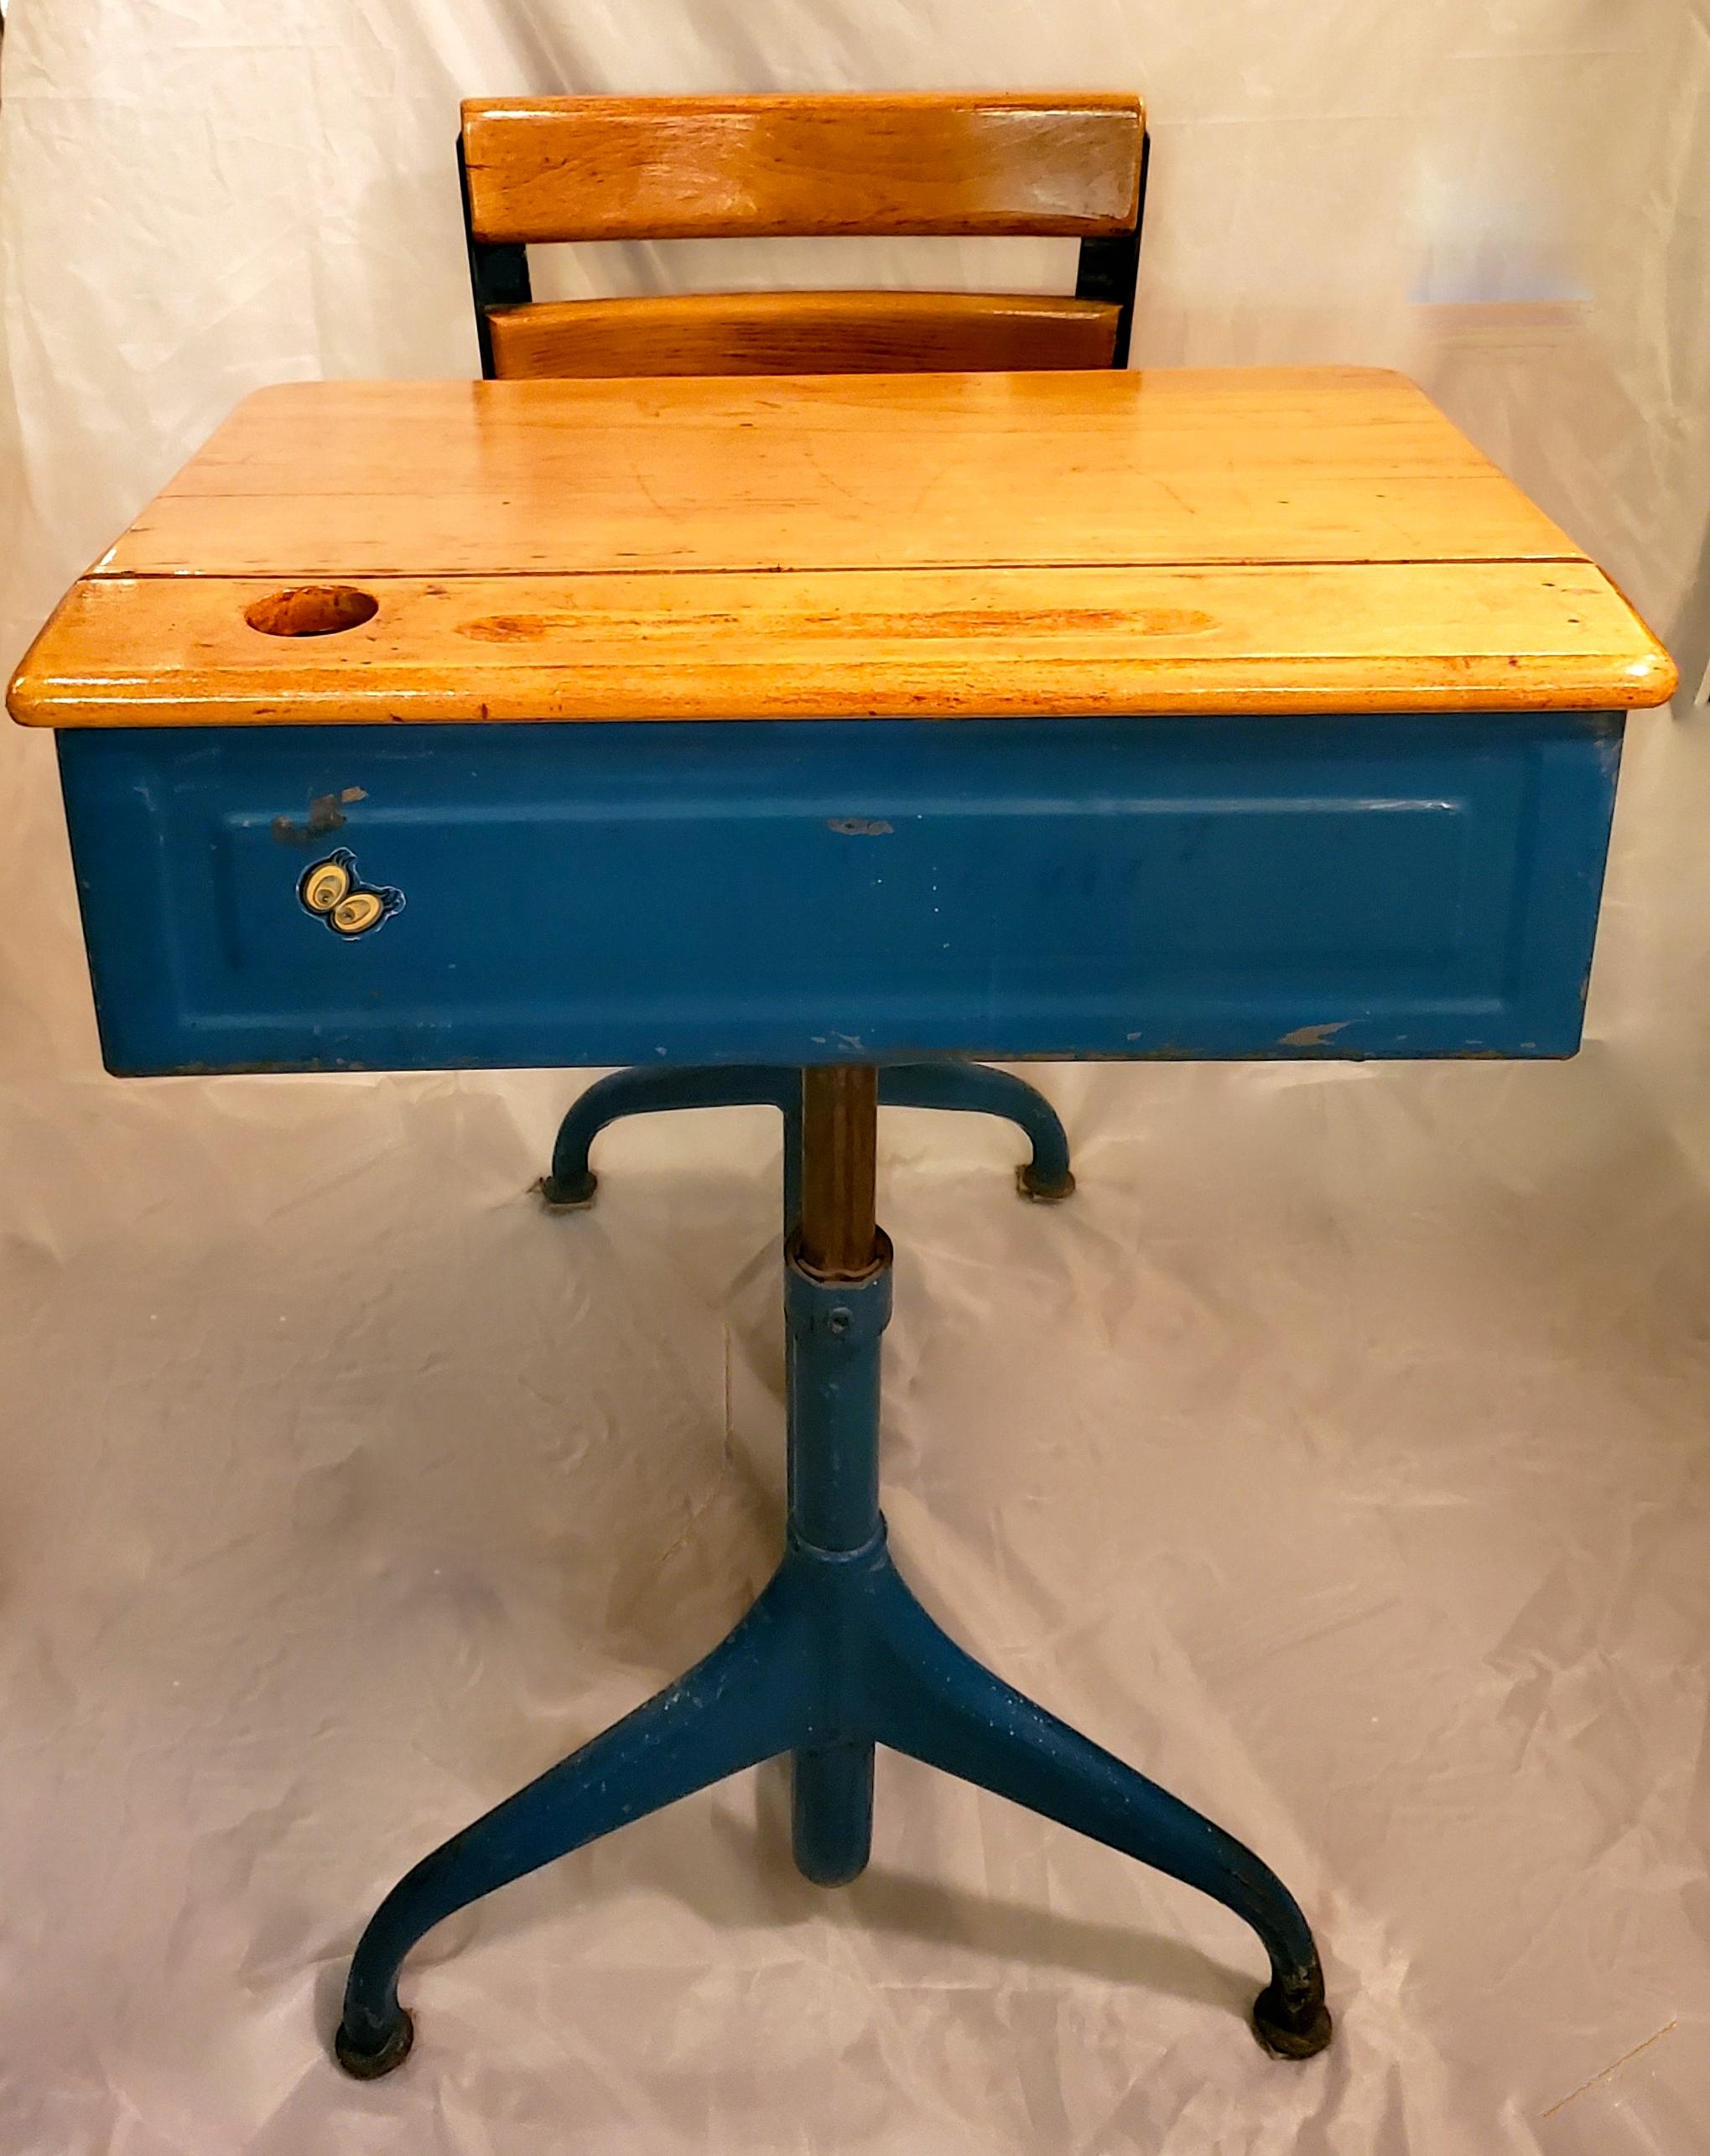 Midcentury Vintage children's school desk chair. Untouched paint and original parts. Great condition. The wooden desk has the original hinges . This great desk is usable and fully functional. 

seat height measures - 15 inches 
desk area - 18